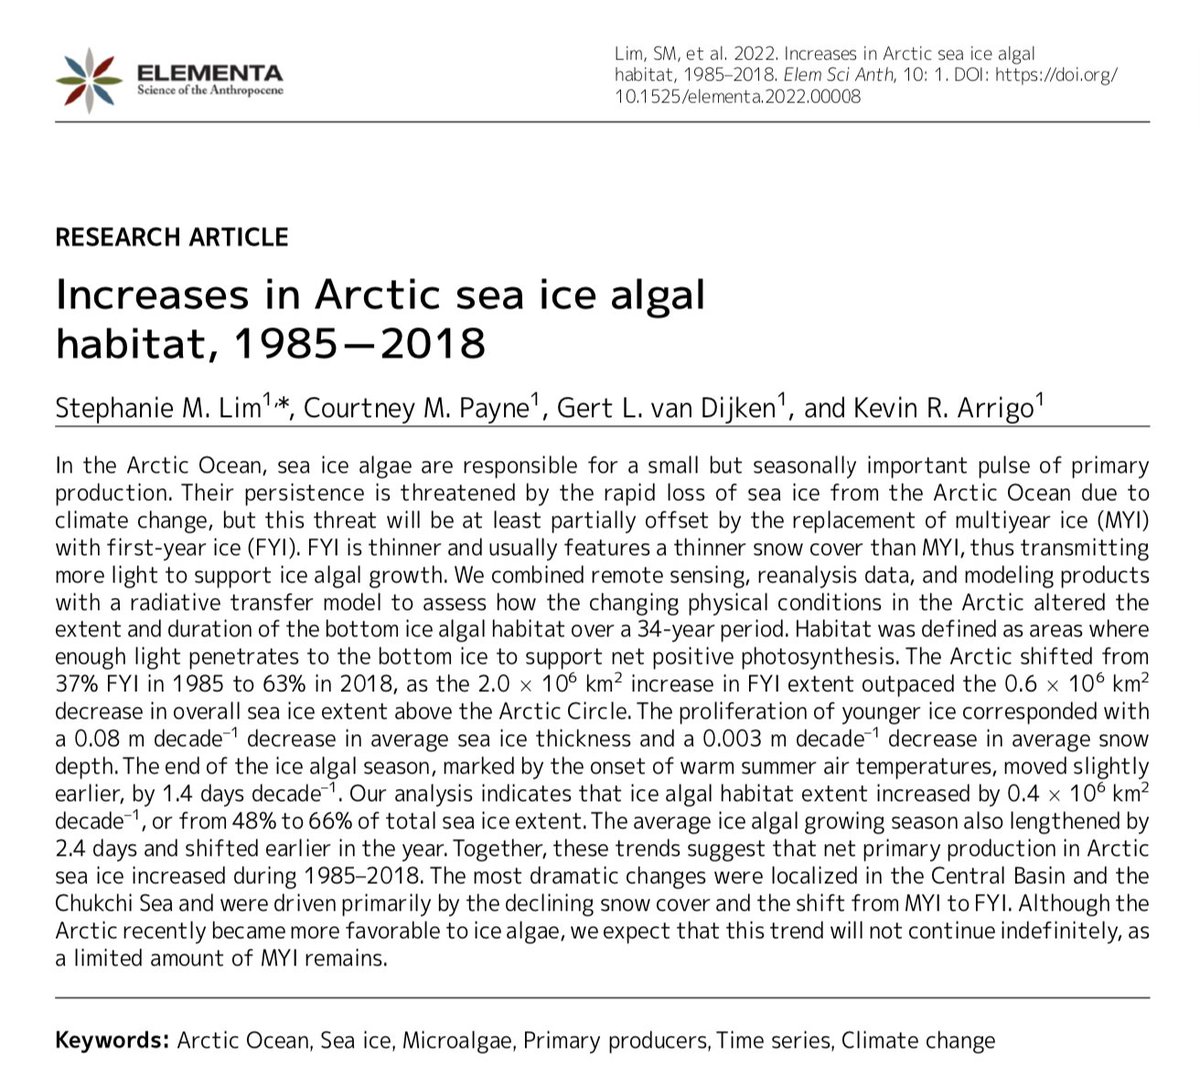 🧊 Sea ice algae live in/attached to Arctic sea ice. Sea ice is melting and decreasing. BUT ice algal habitat is increasing! How is this possible? 😮 🚨 We look at this in my first PhD paper: online.ucpress.edu/elementa/artic… 🧵A thread on what we found... (1/n)